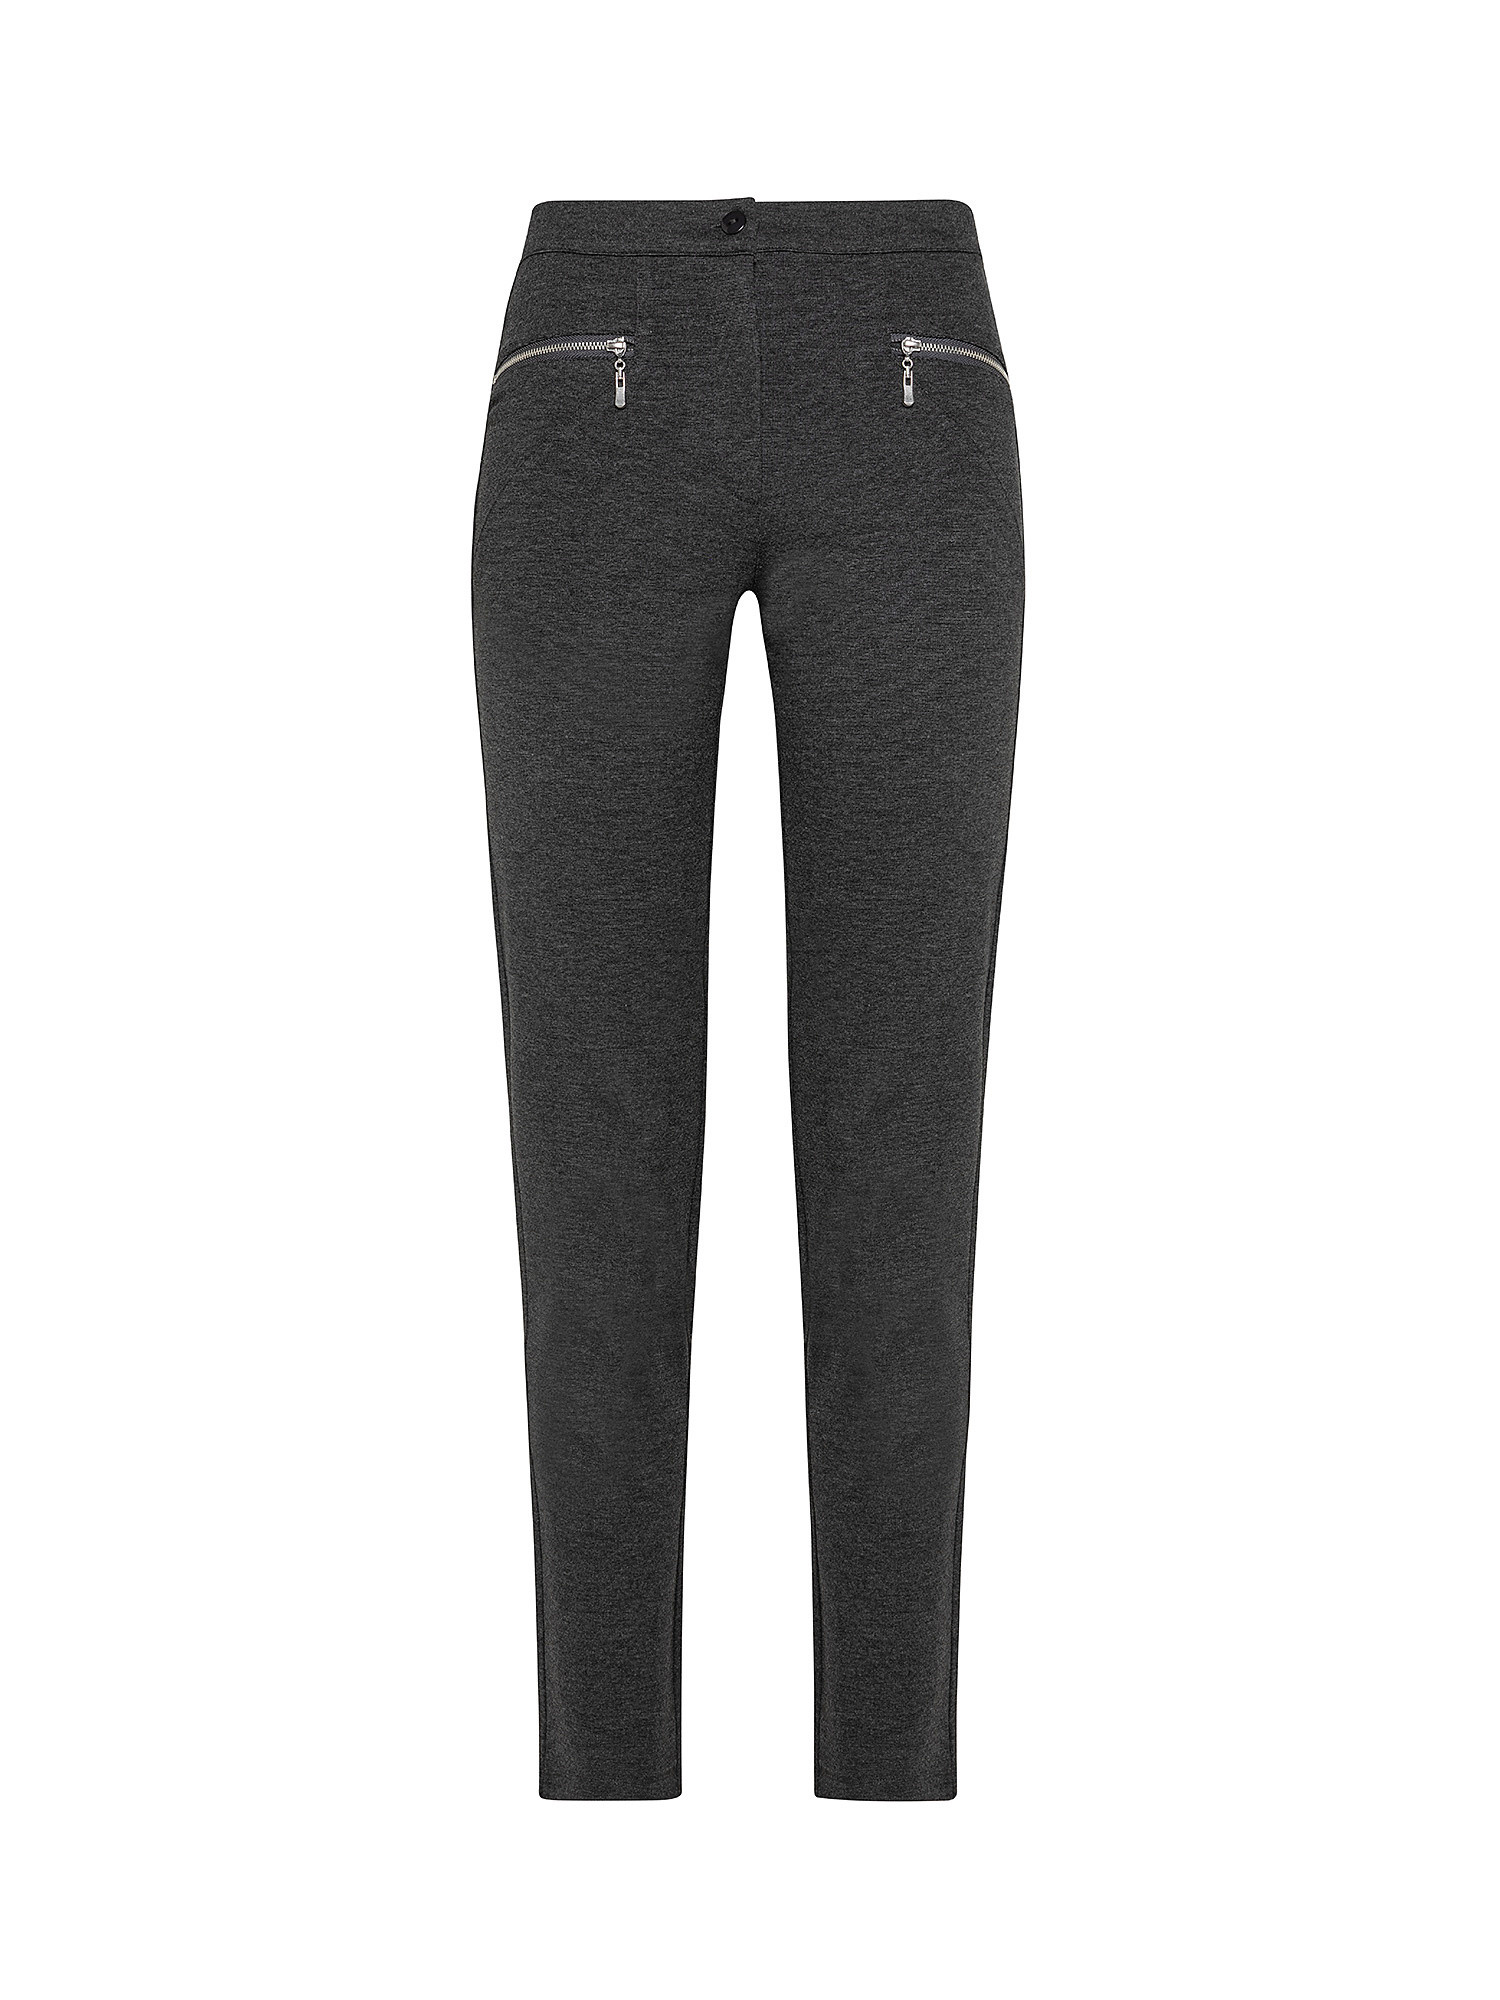 Trousers with pockets, Grey, large image number 0